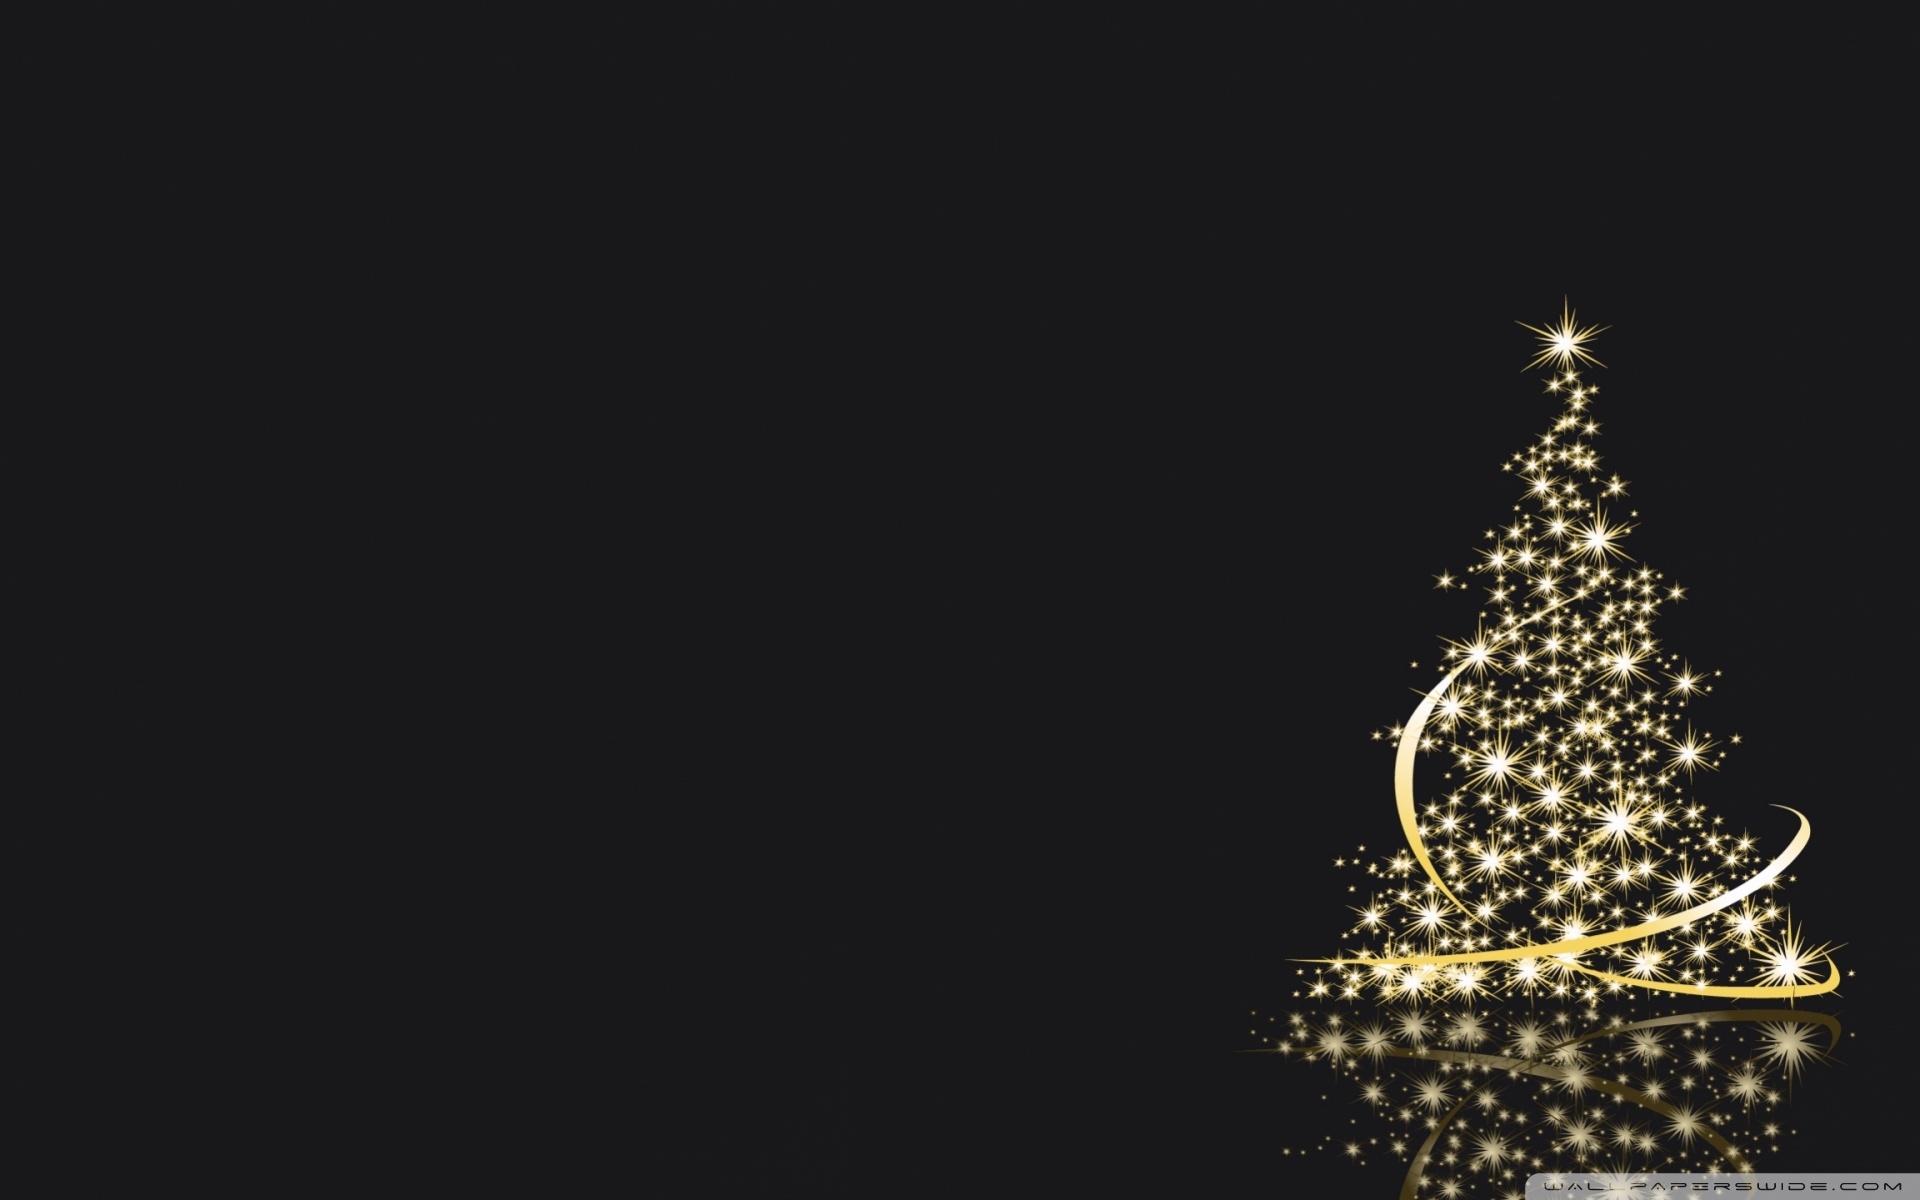 Abstract Christmas Tree - Christmas Wallpaper Free , HD Wallpaper & Backgrounds